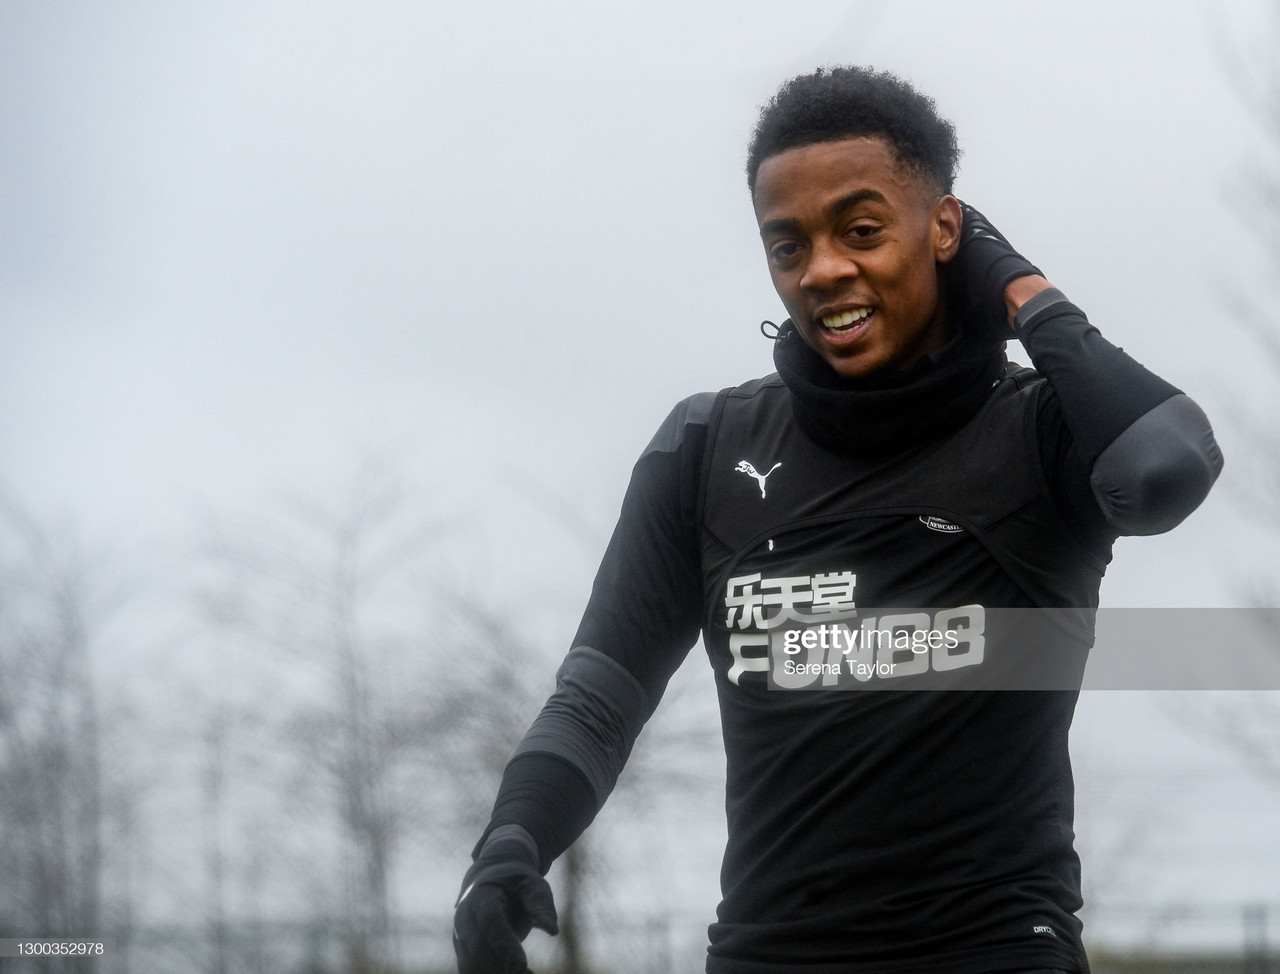 Where does Joe Willock fit into the Newcastle United side?